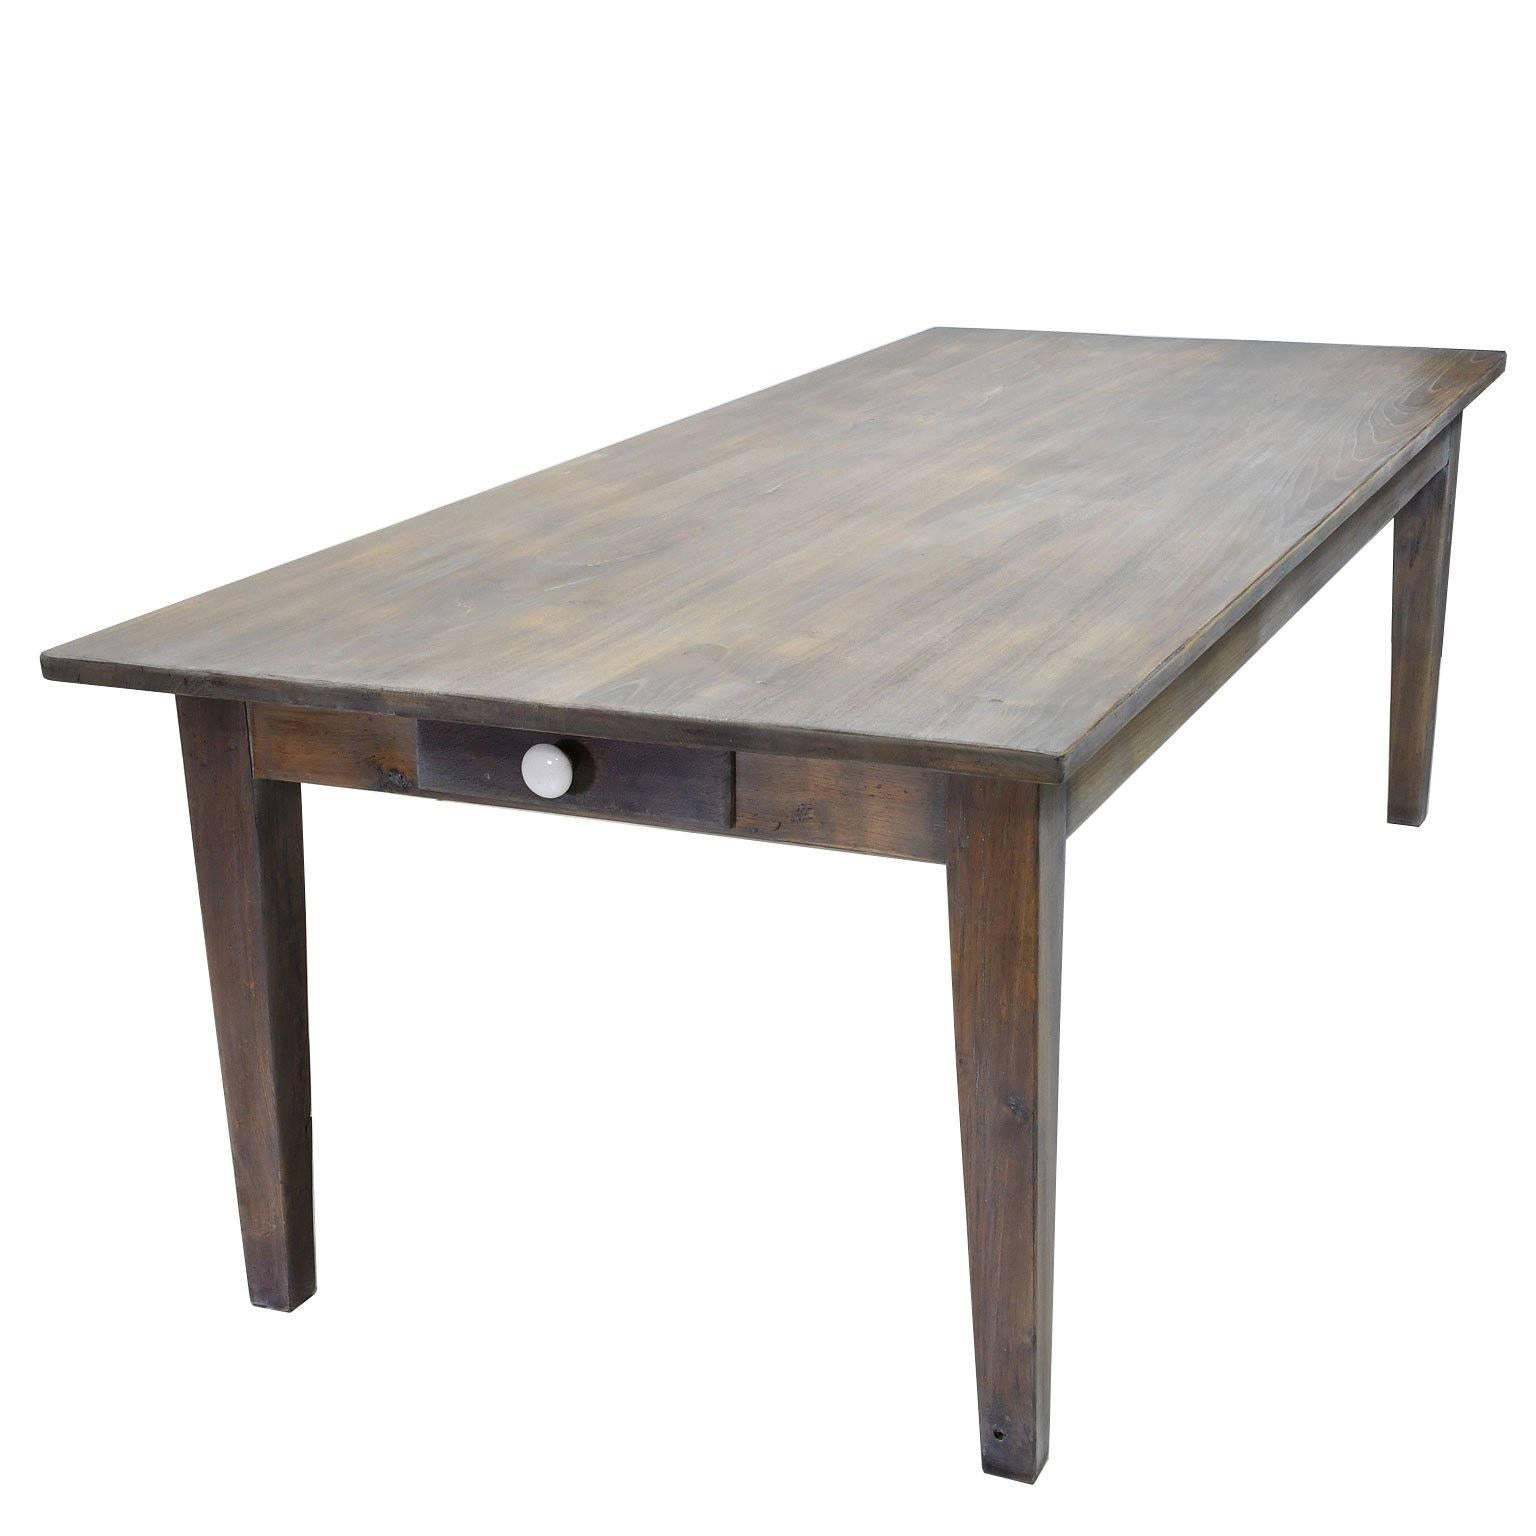 A one-of-a-kind, custom made rectangular dining table with square tapering legs in repurposed white French oak, with pull-out server on one end of the table and a drawer on the other. Table is finished with a LEED-certified organic oil in a